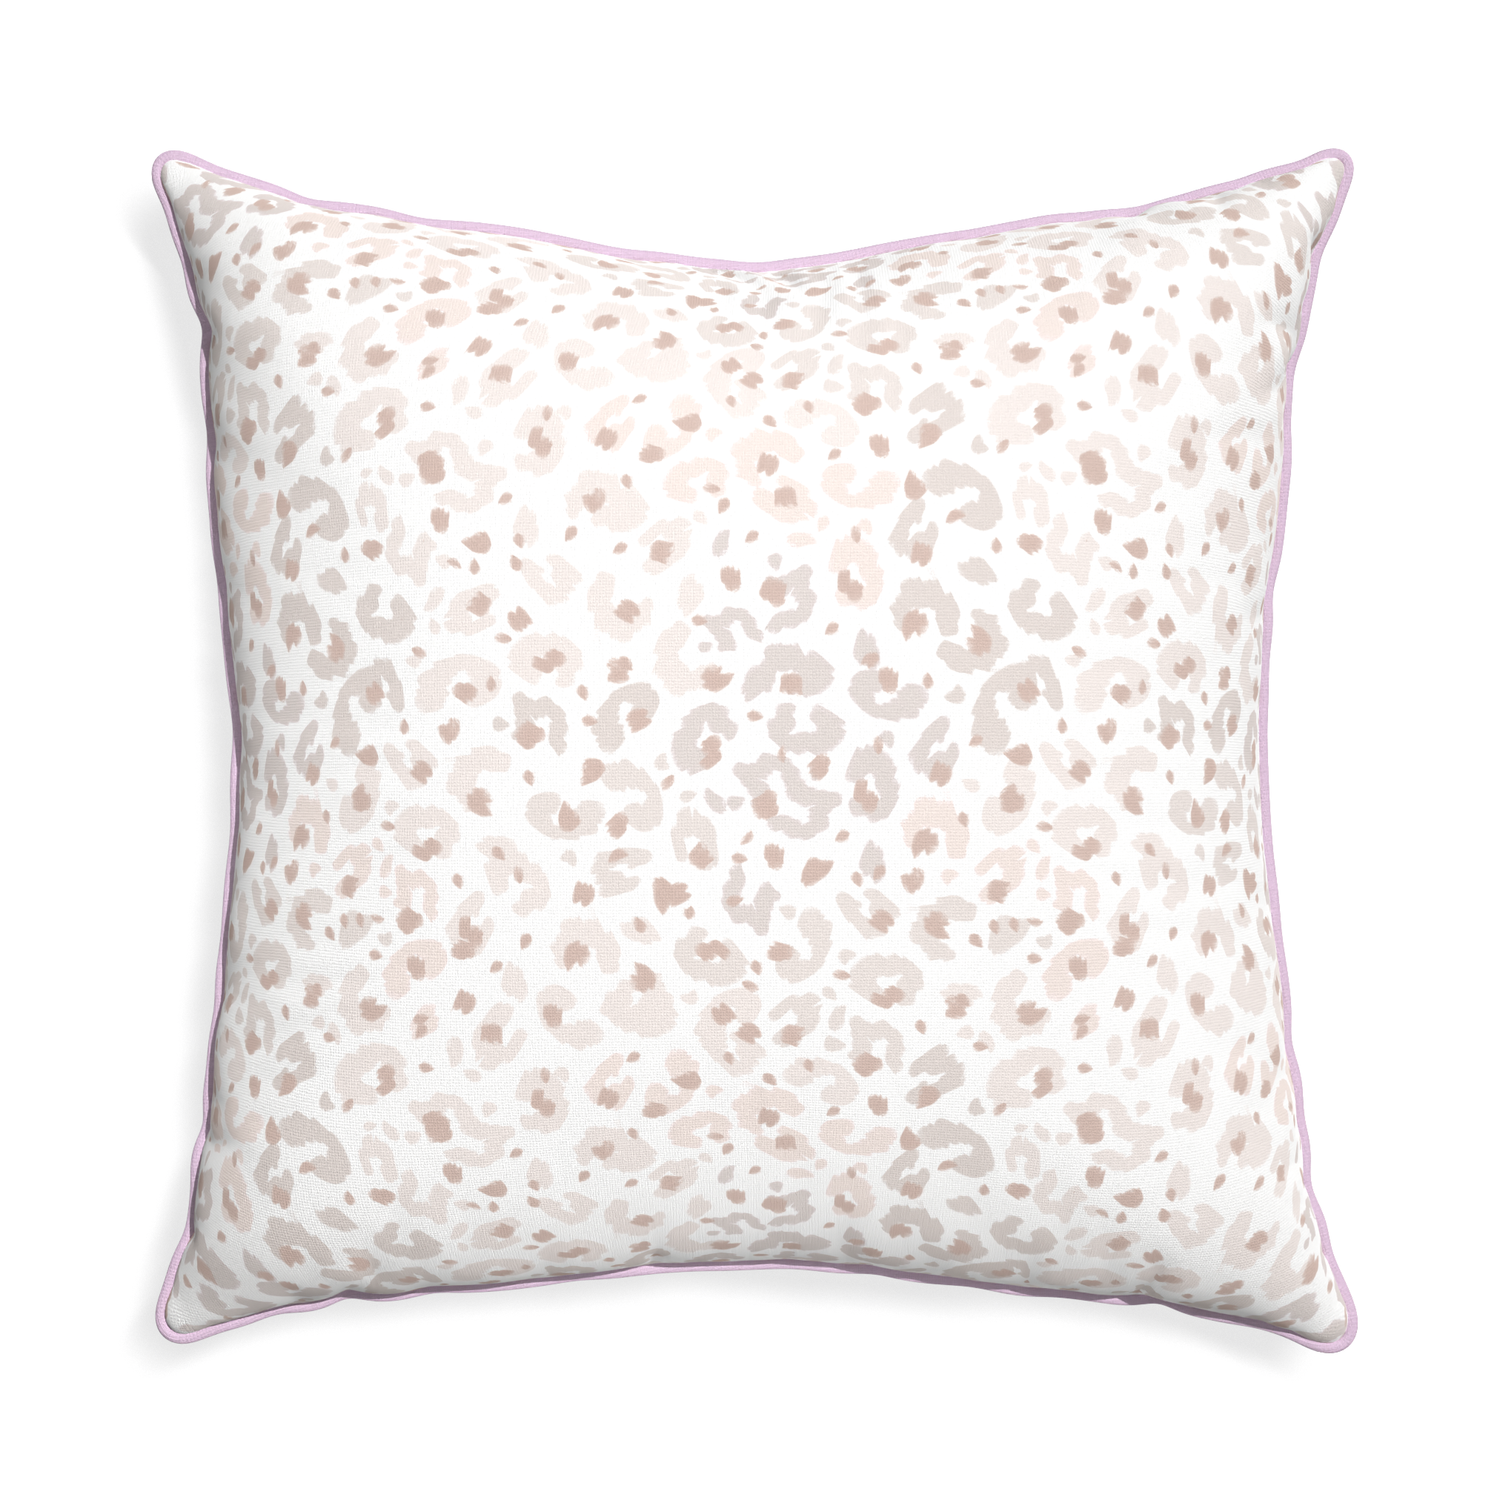 Euro-sham rosie custom pillow with l piping on white background